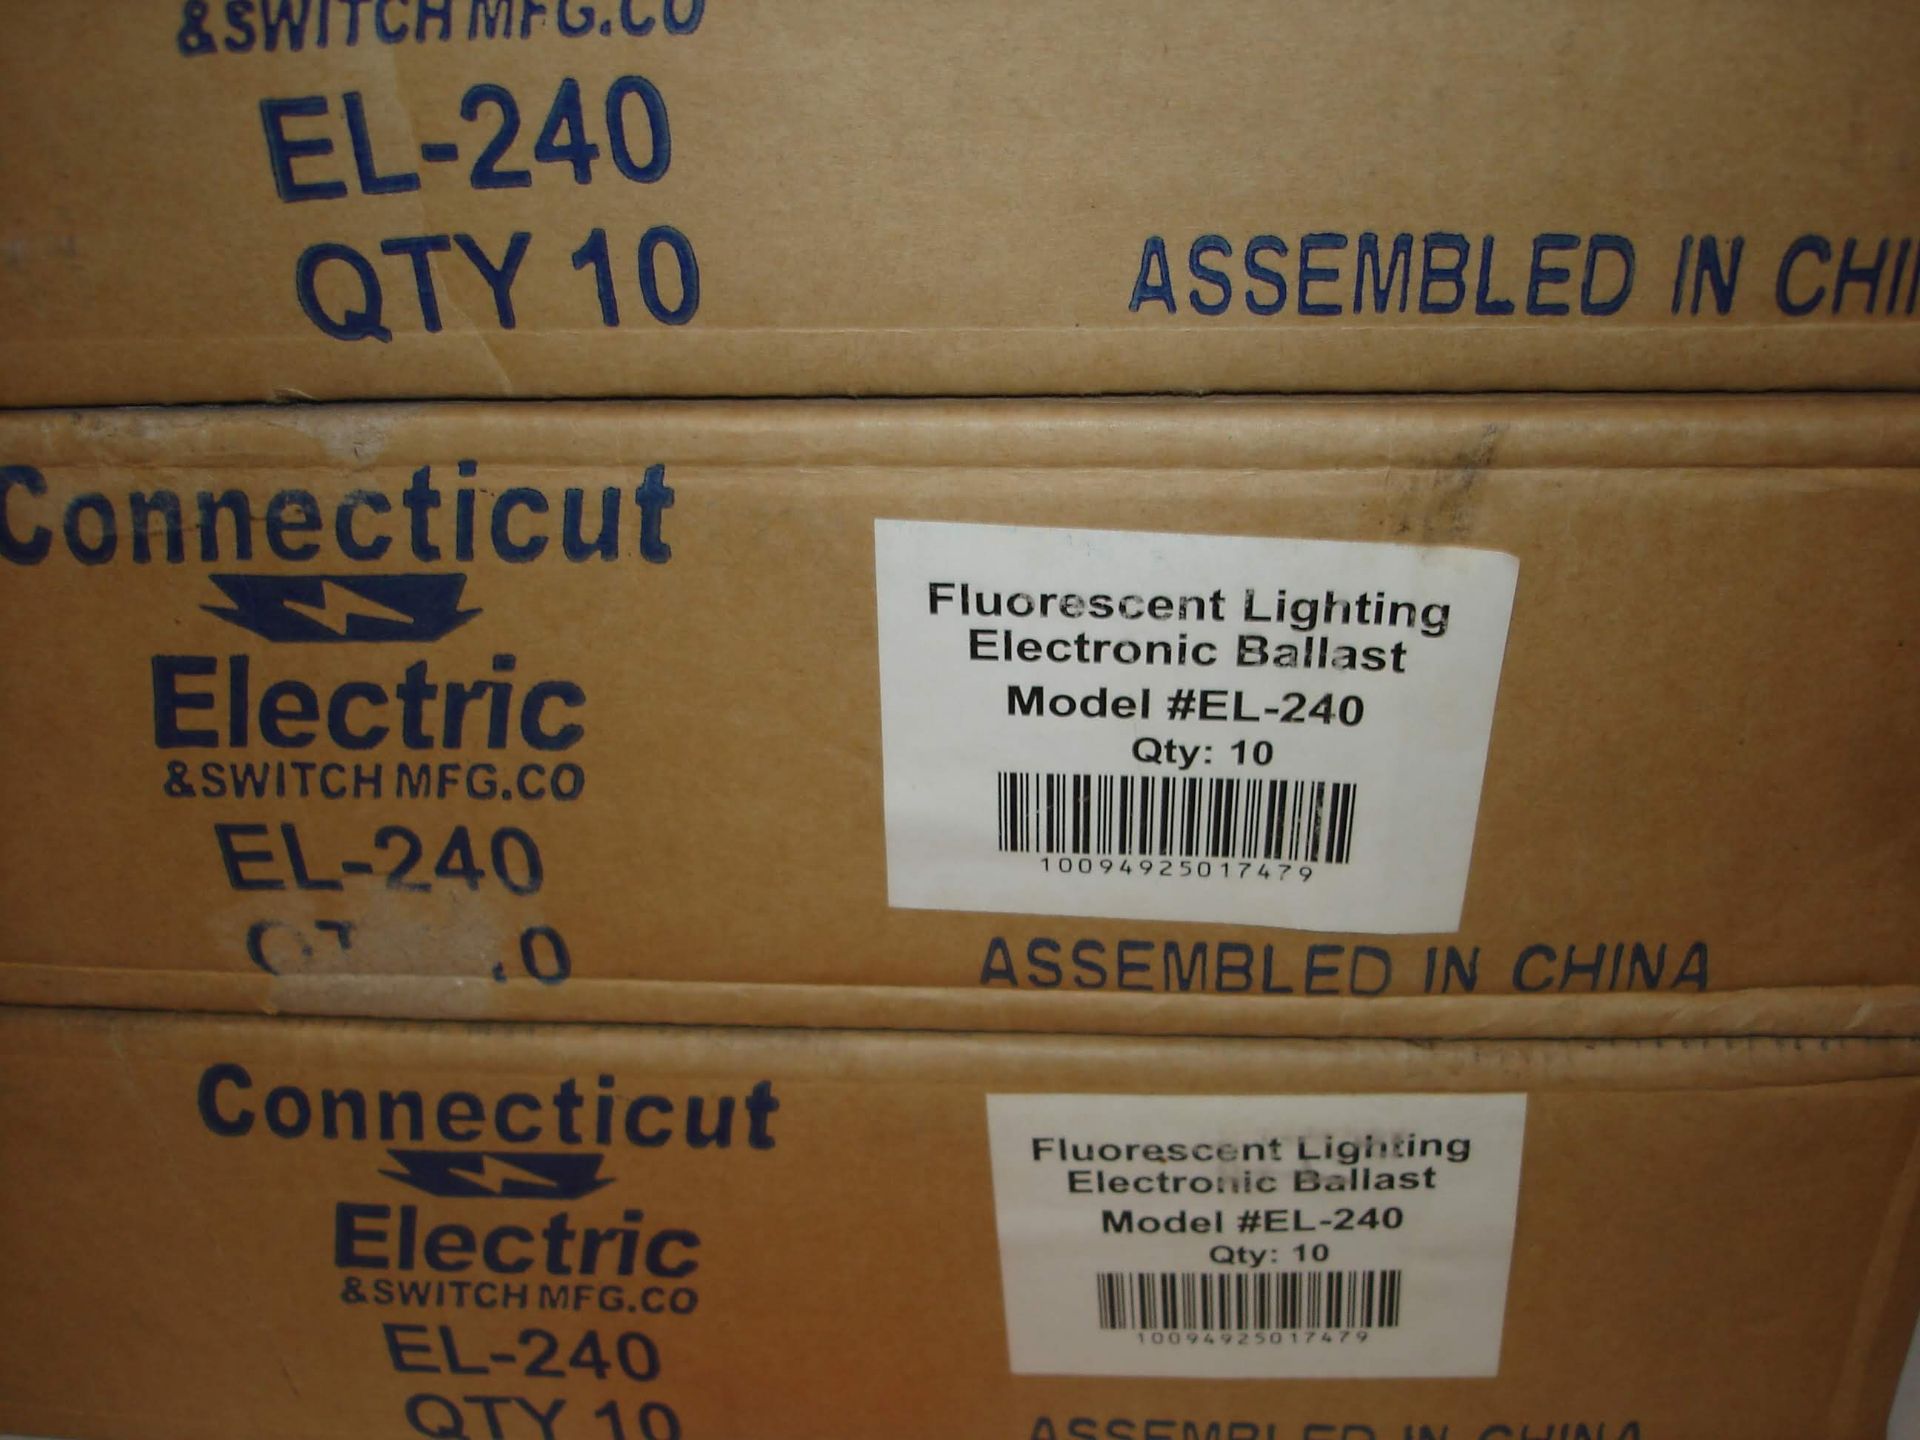 (3 BOXES/QTY 10 PER BOX) BRAND NEW SEALED CONNECTICUT ELECTRIC BALLAST EL-240 (LOCATED AT: 1200 - Image 2 of 2